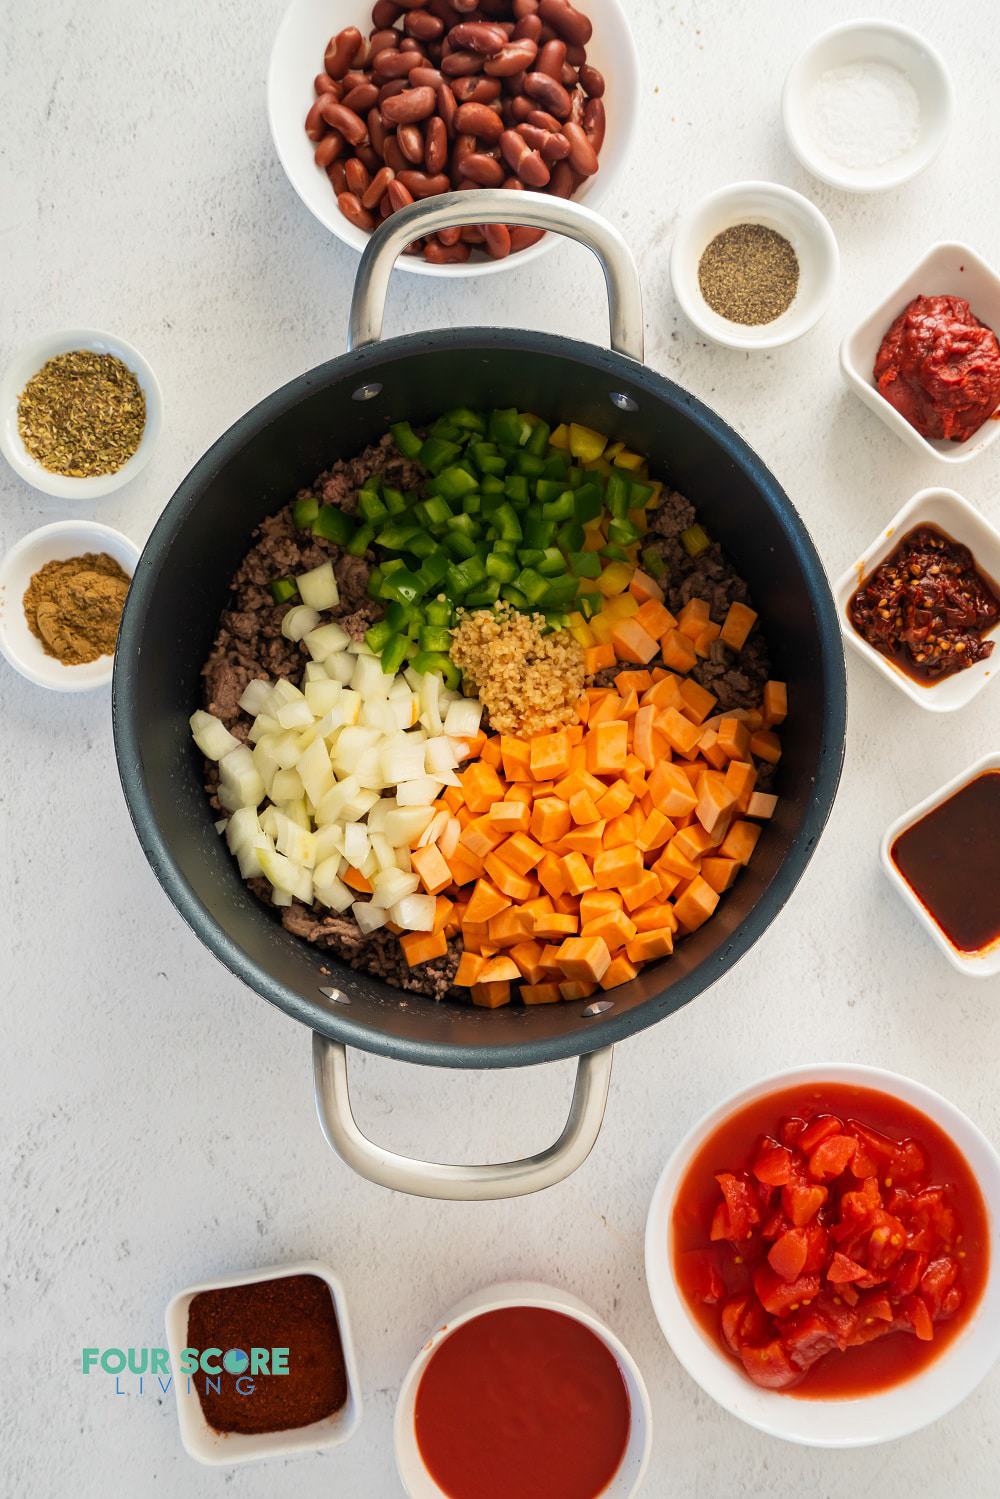 The ingredients for chipotle chili, with meat and vegetables in a pot and seasonings in small bowls surrounding it.